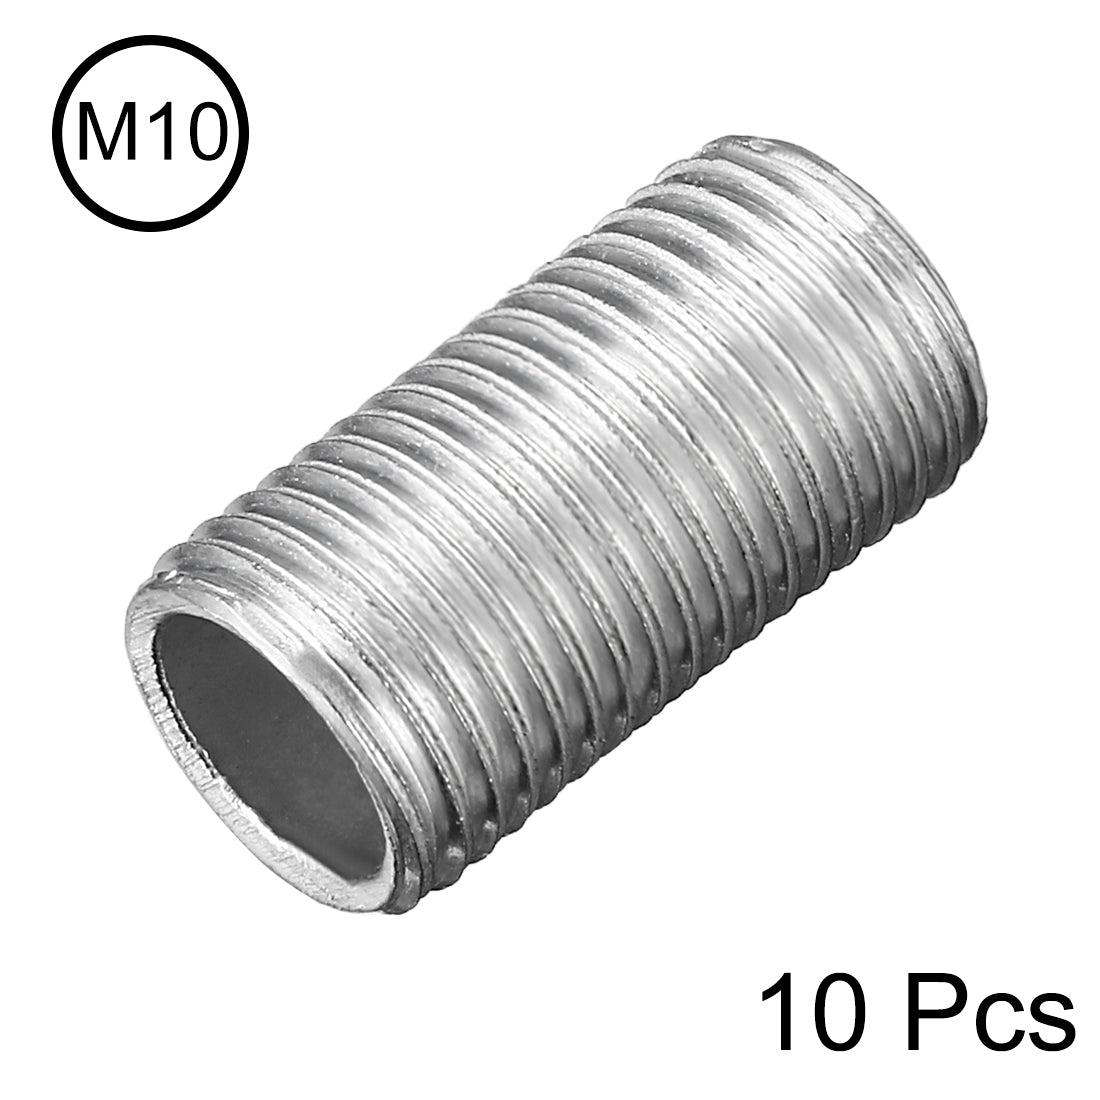 uxcell Uxcell Zinc Plated Lamp Pipe Nipple M10 20mm Length 1mm Pitch All Threaded 10Pcs